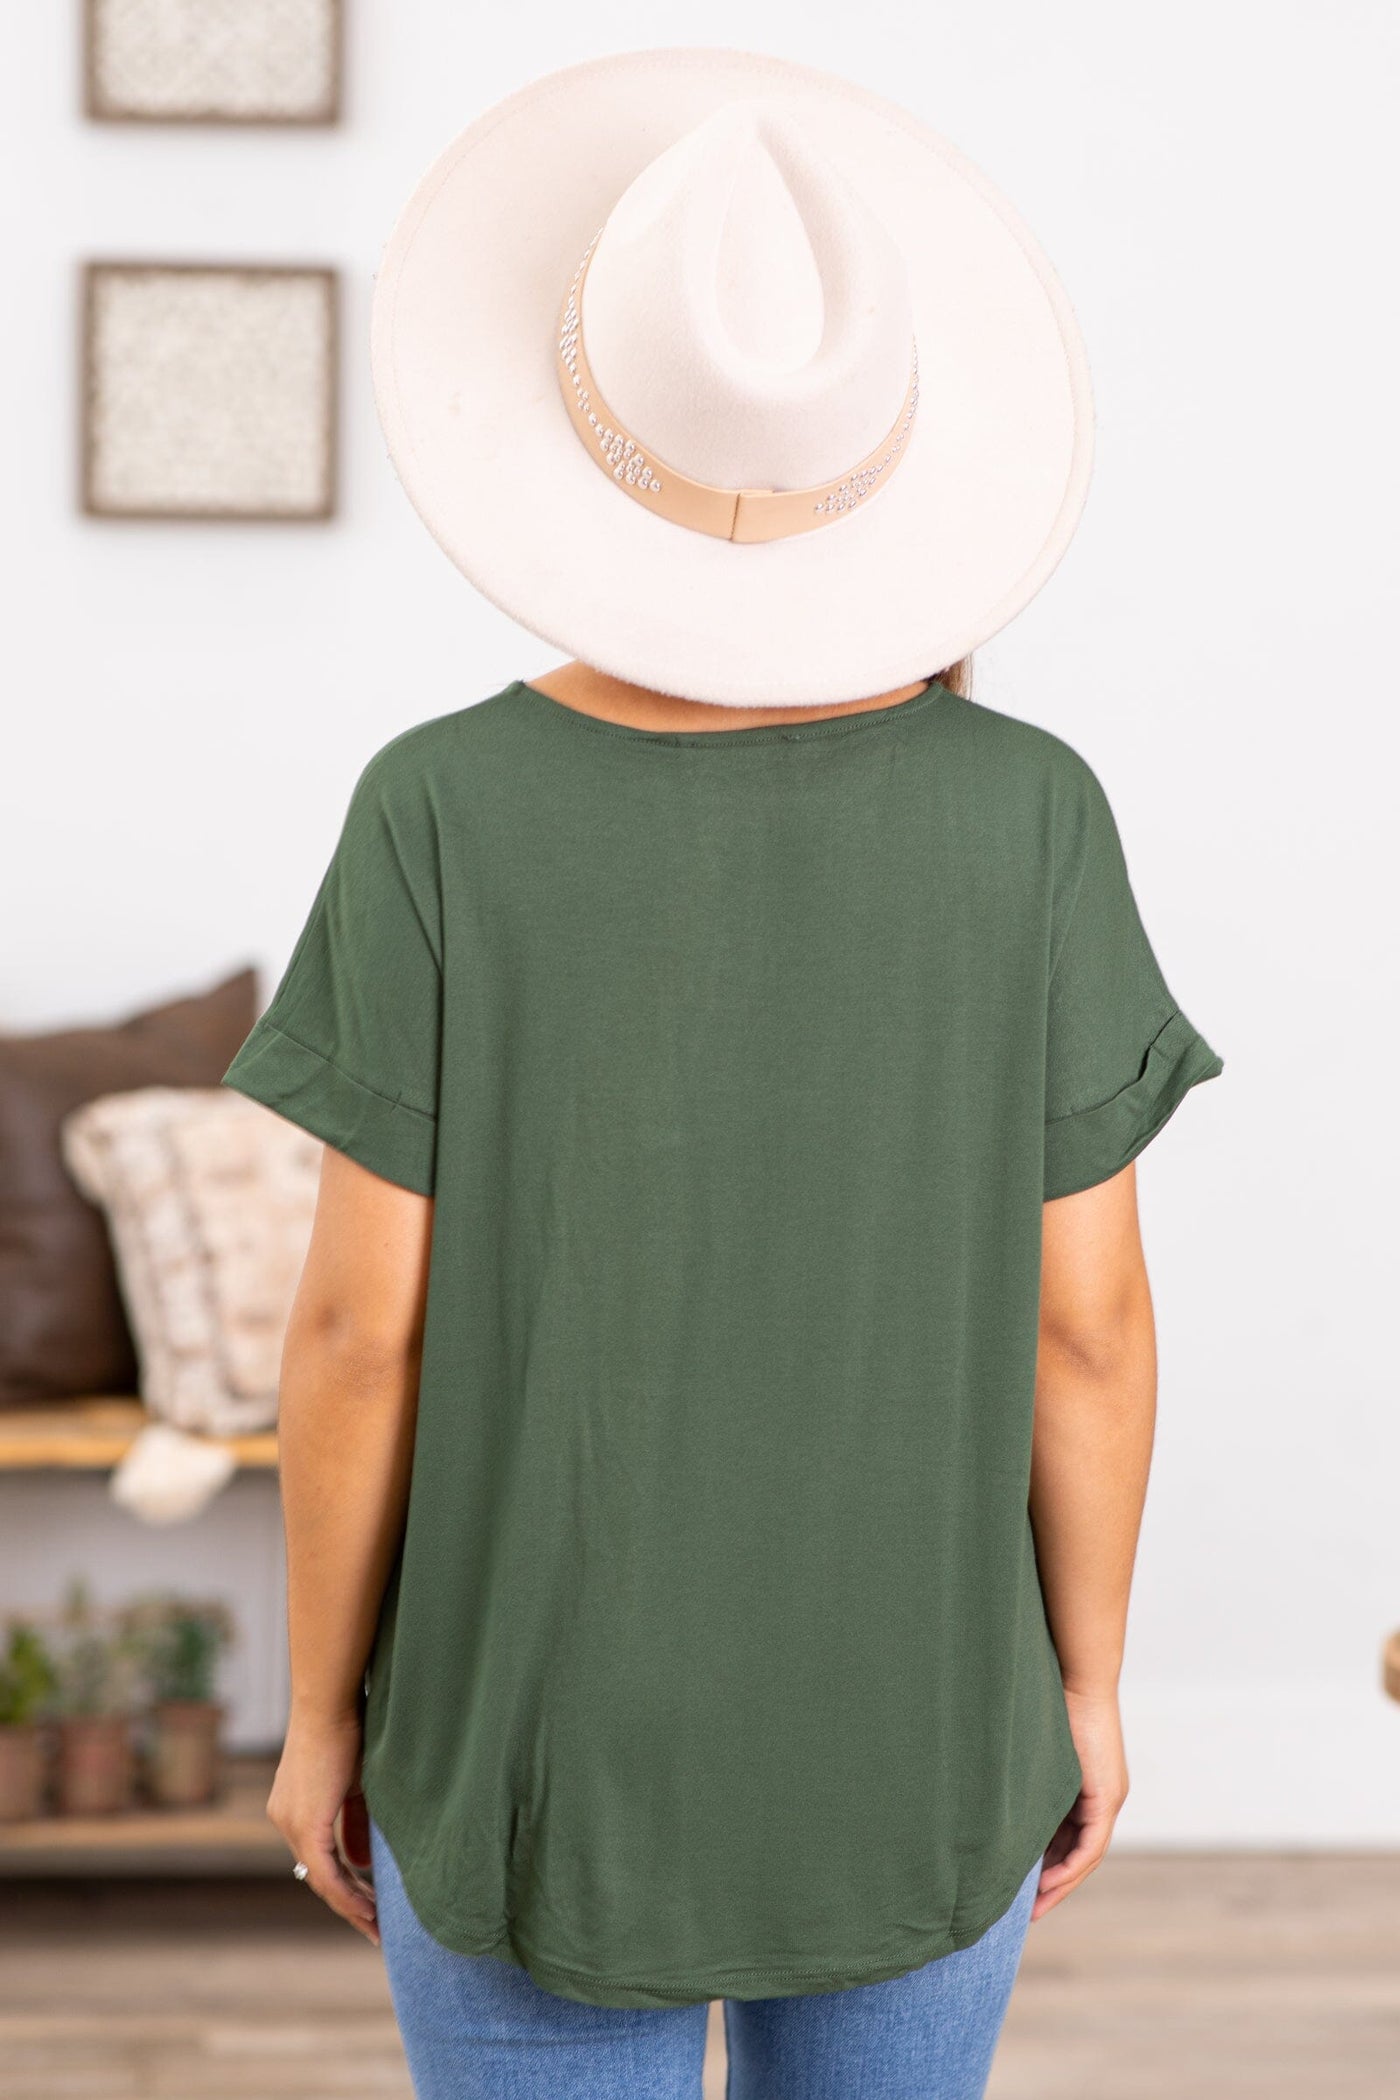 Hunter Green Knot Front Short Sleeve Top - Filly Flair